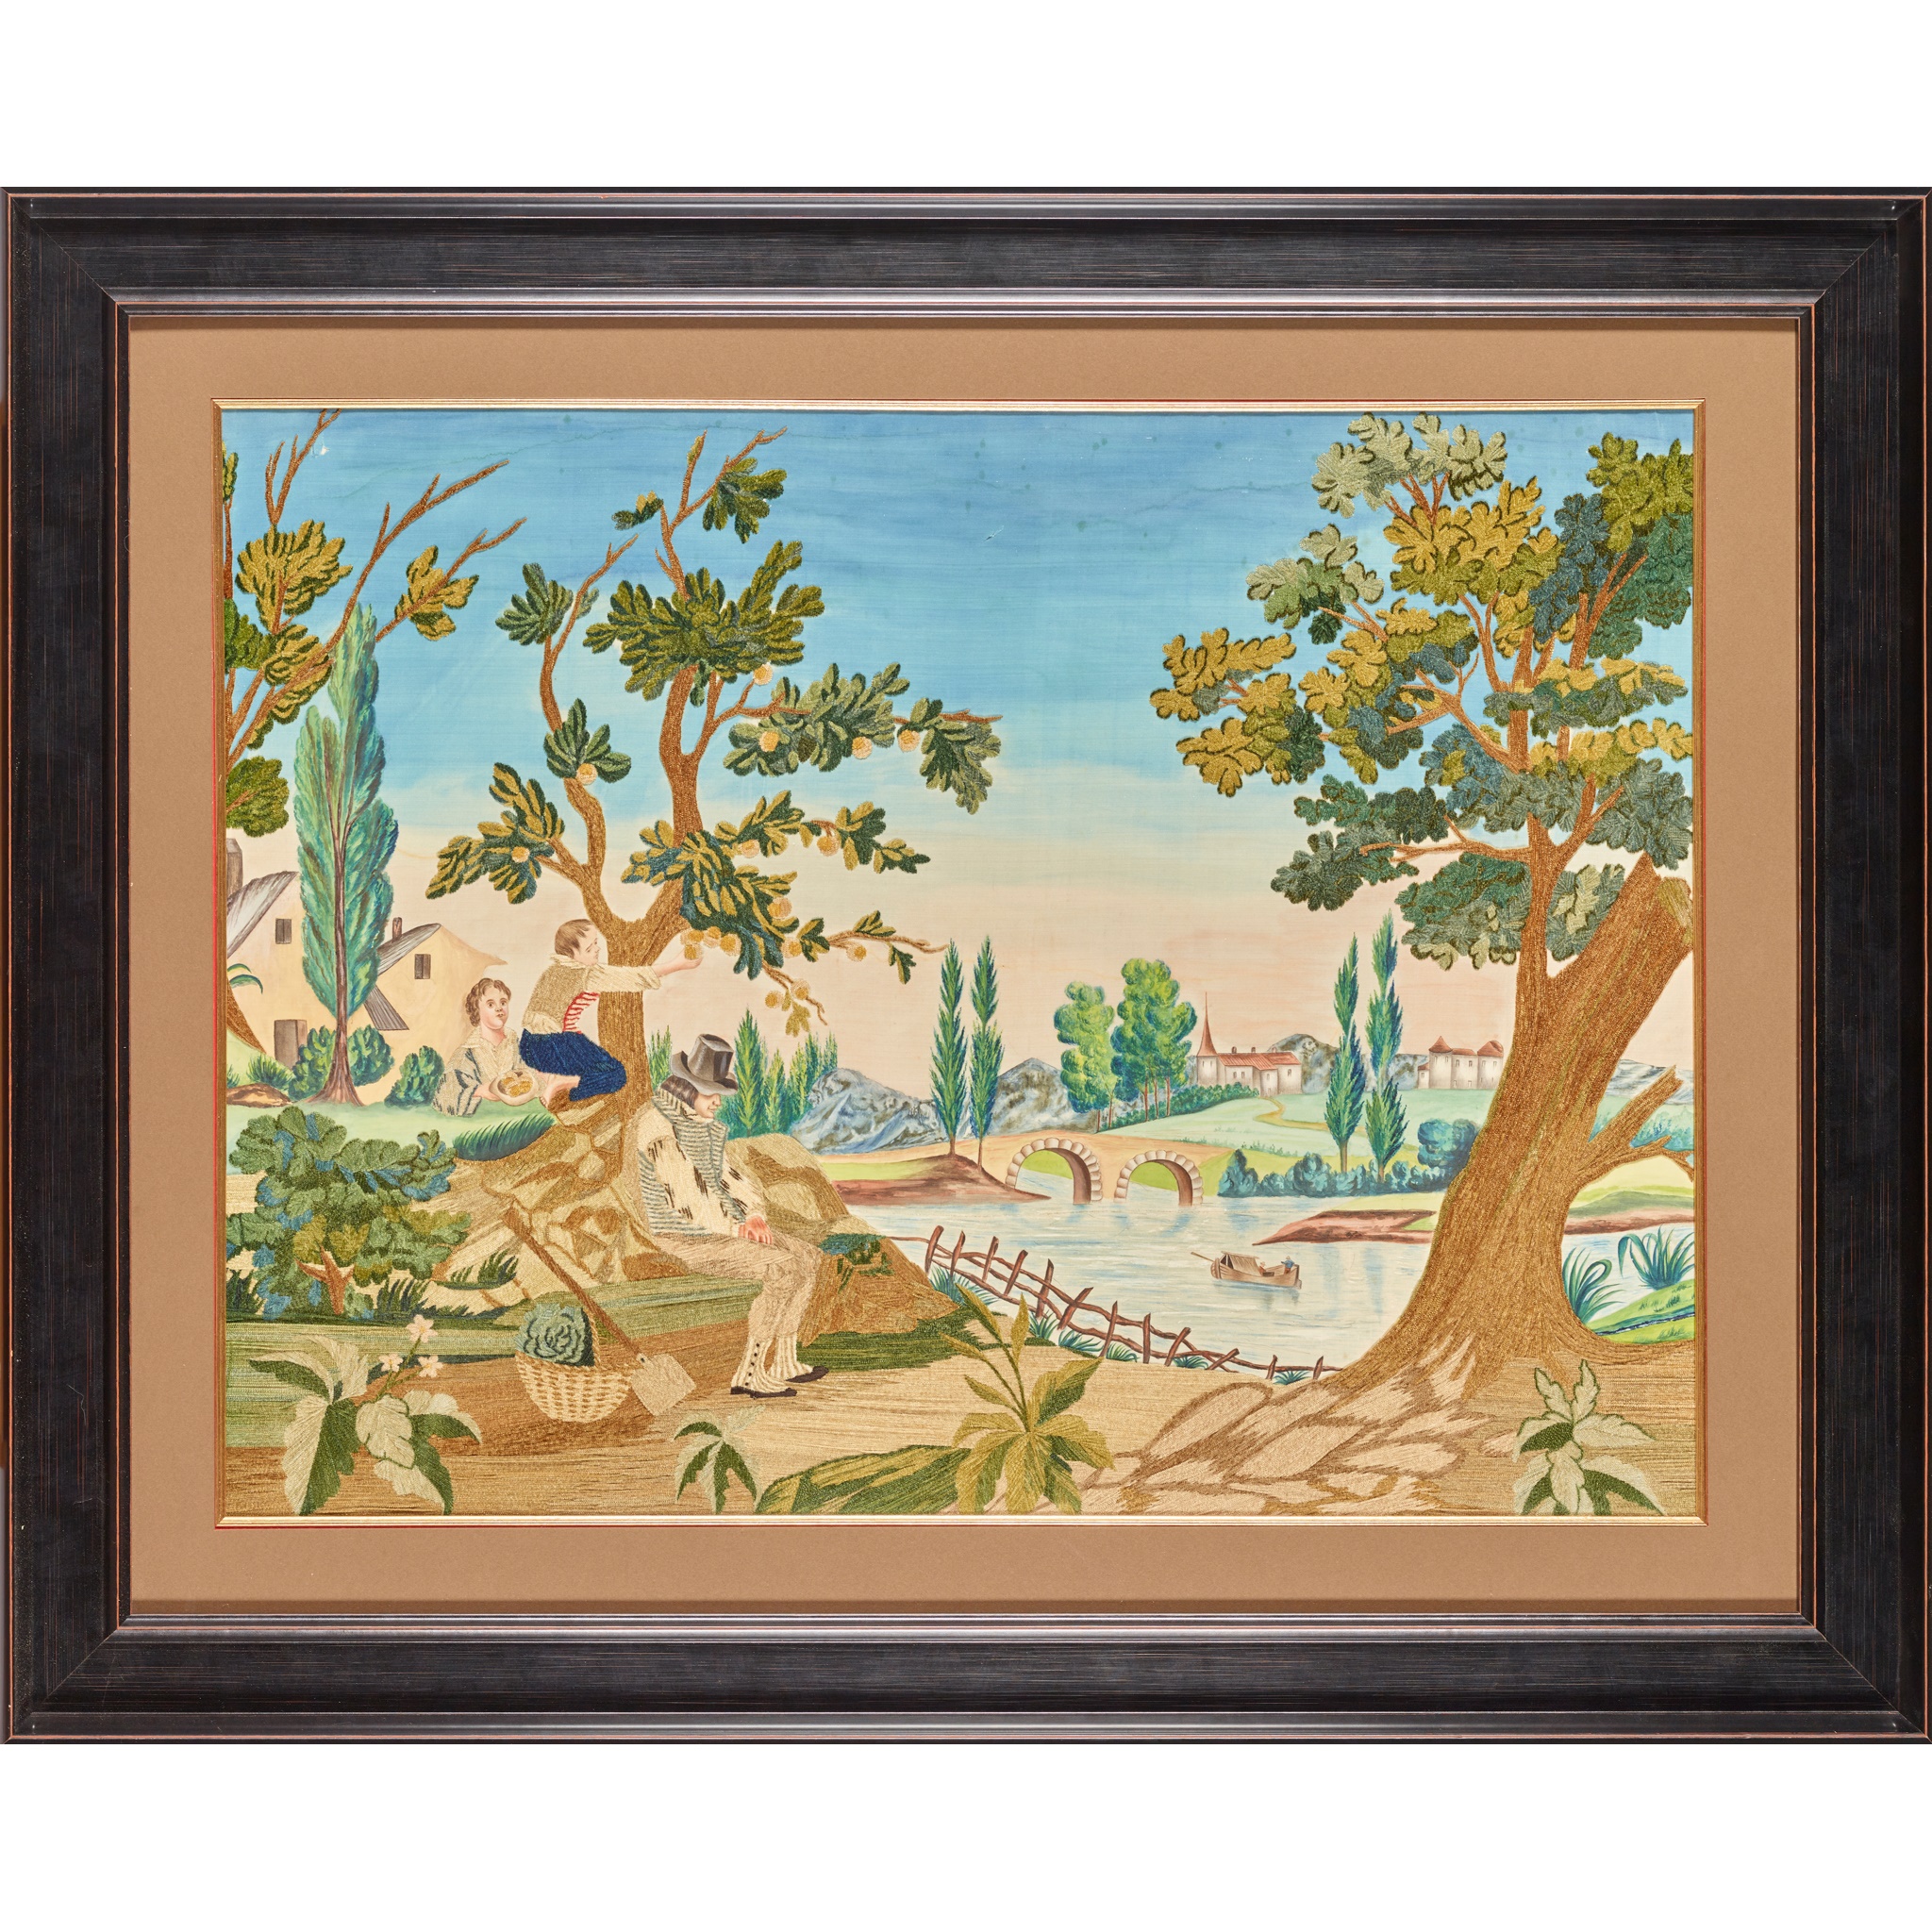 ENGLISH FRAMED PAINTED AND EMBROIDERED PANEL, CIRCA 1820 - Image 2 of 3